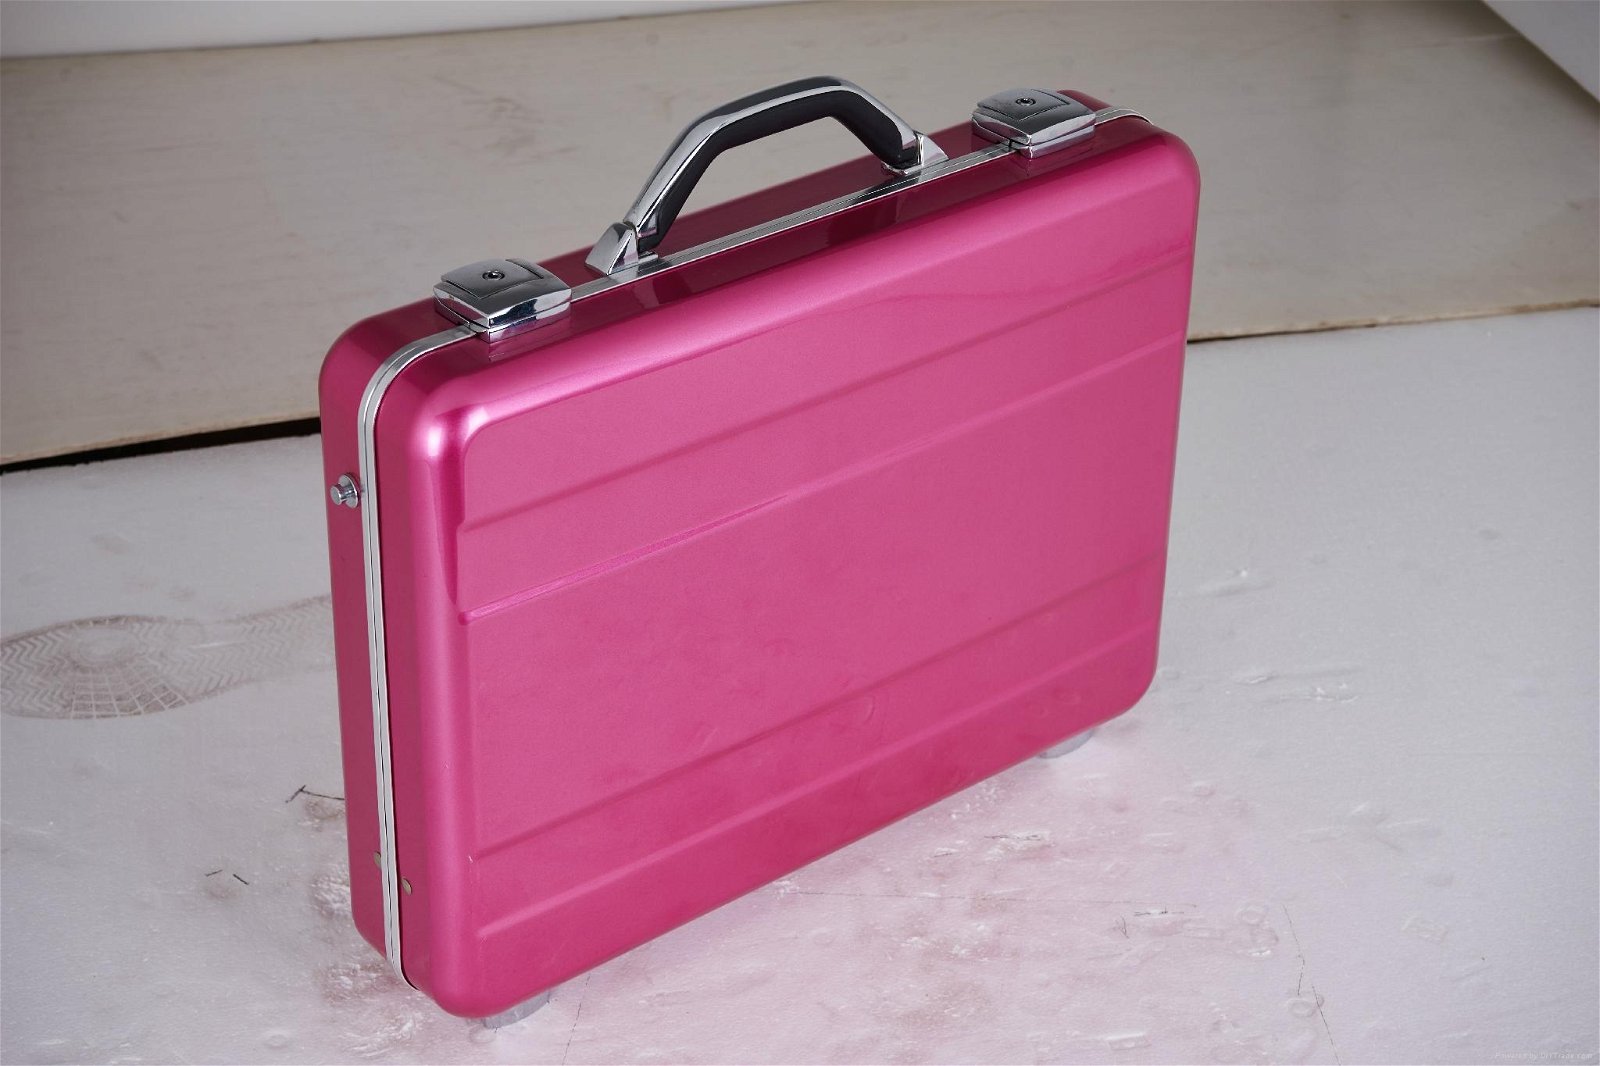 Anodize Aluminum Alloy Attache Cases For Carry Documents or Laptop Computer